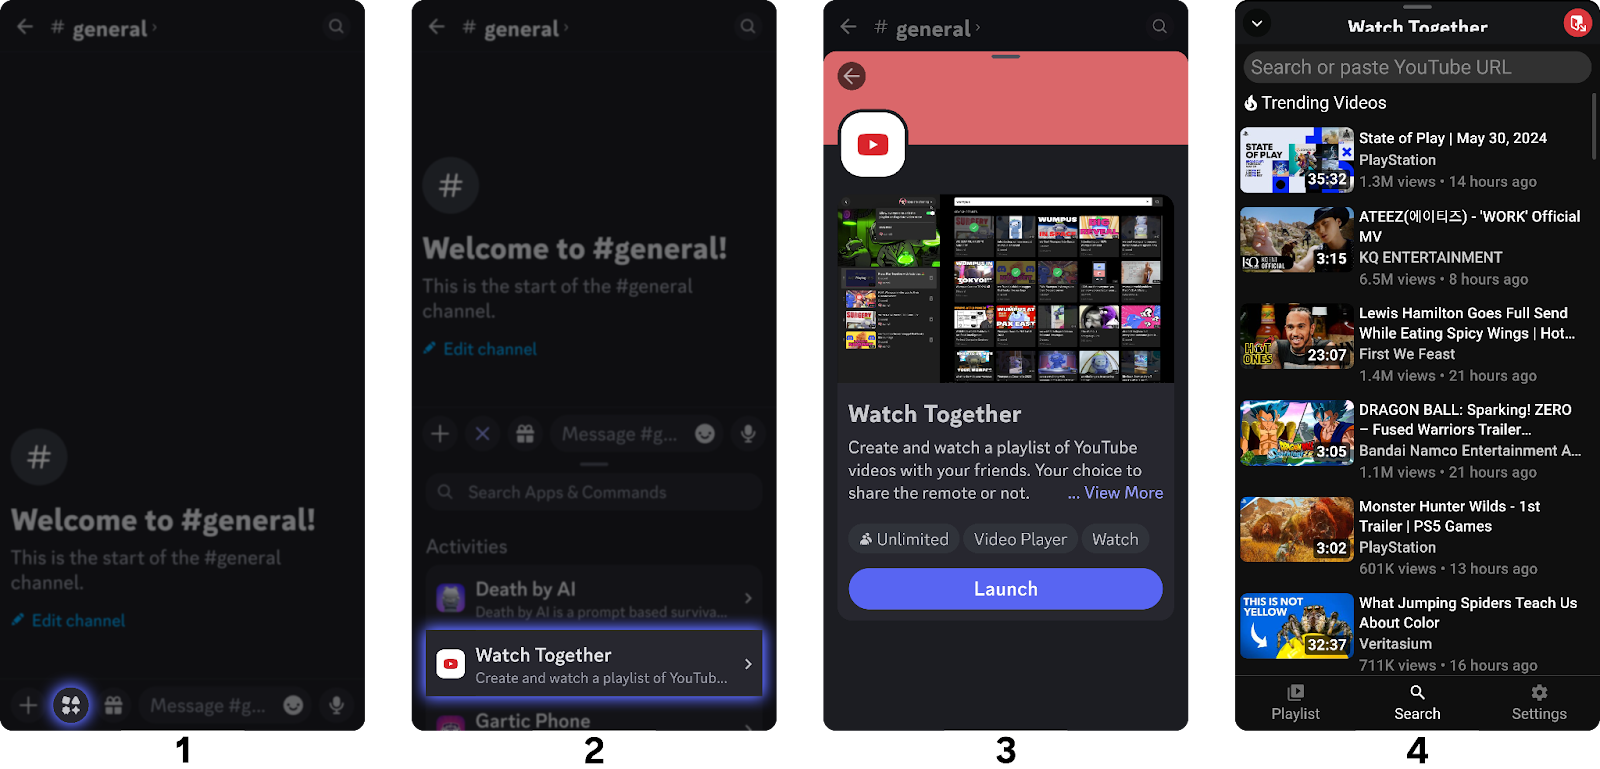 Steps of starting a Watch Together (YouTube) Activity on Discord mobile